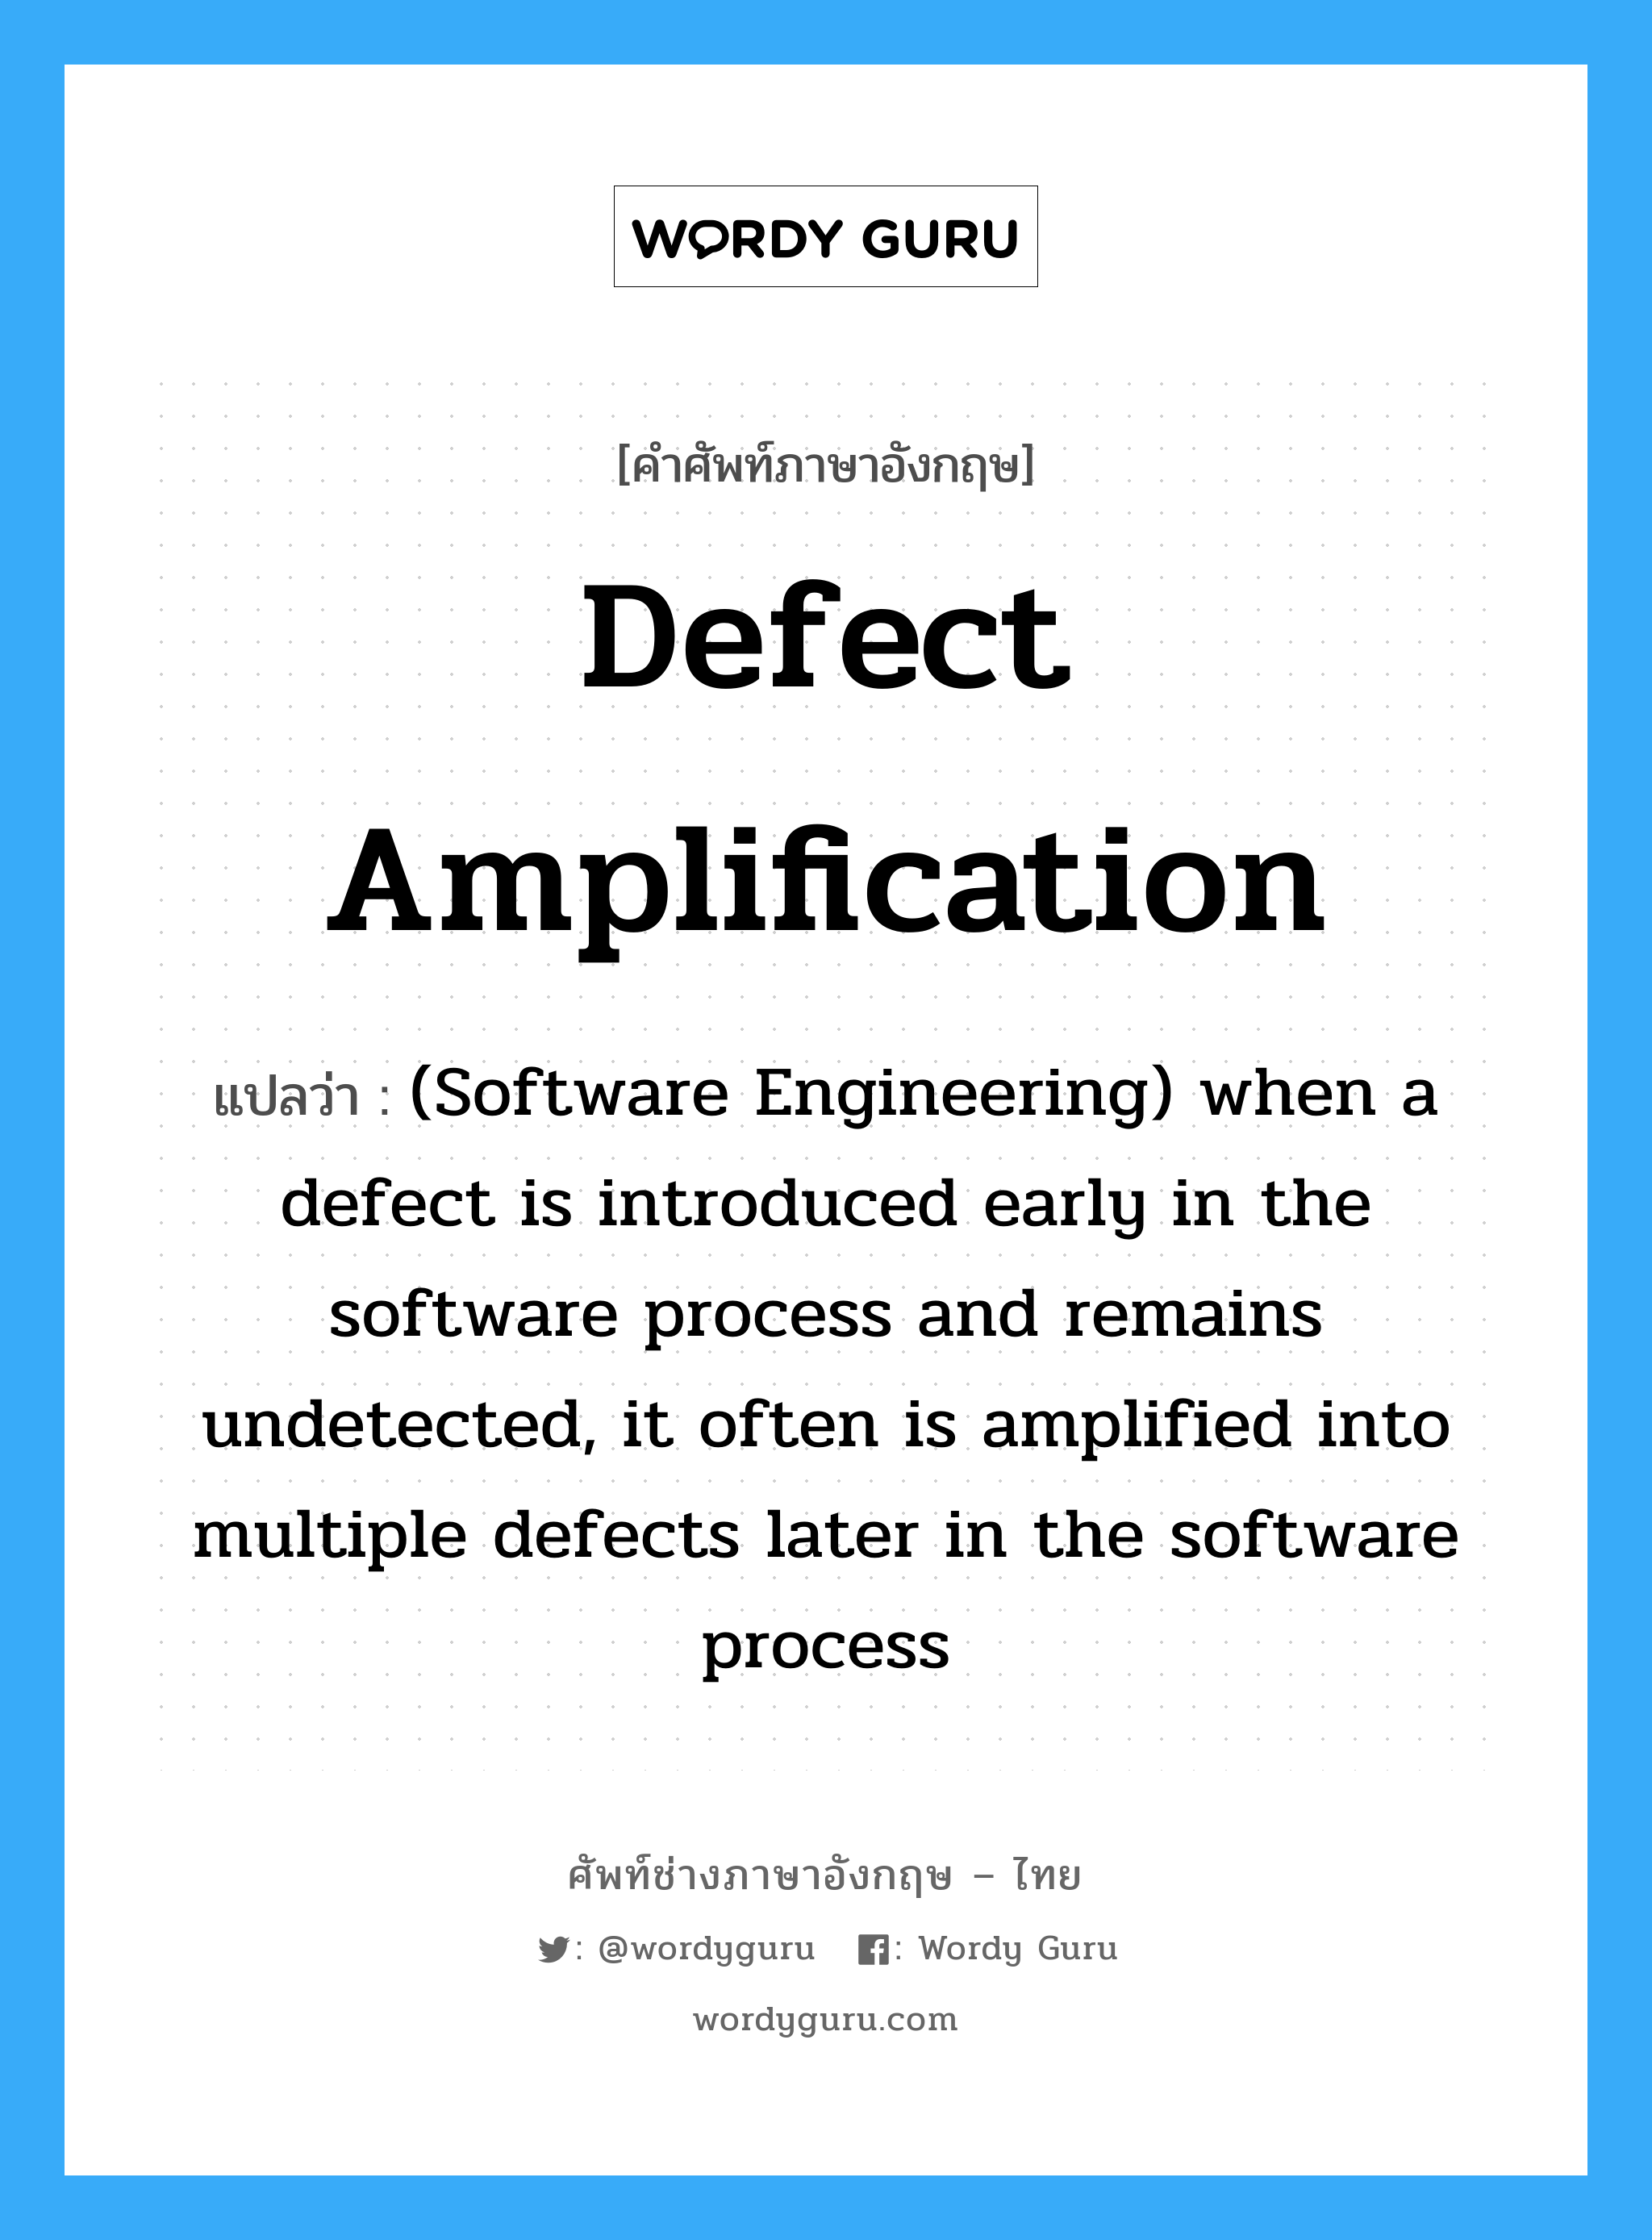 Defect amplification แปลว่า?, คำศัพท์ช่างภาษาอังกฤษ - ไทย Defect amplification คำศัพท์ภาษาอังกฤษ Defect amplification แปลว่า (Software Engineering) when a defect is introduced early in the software process and remains undetected, it often is amplified into multiple defects later in the software process